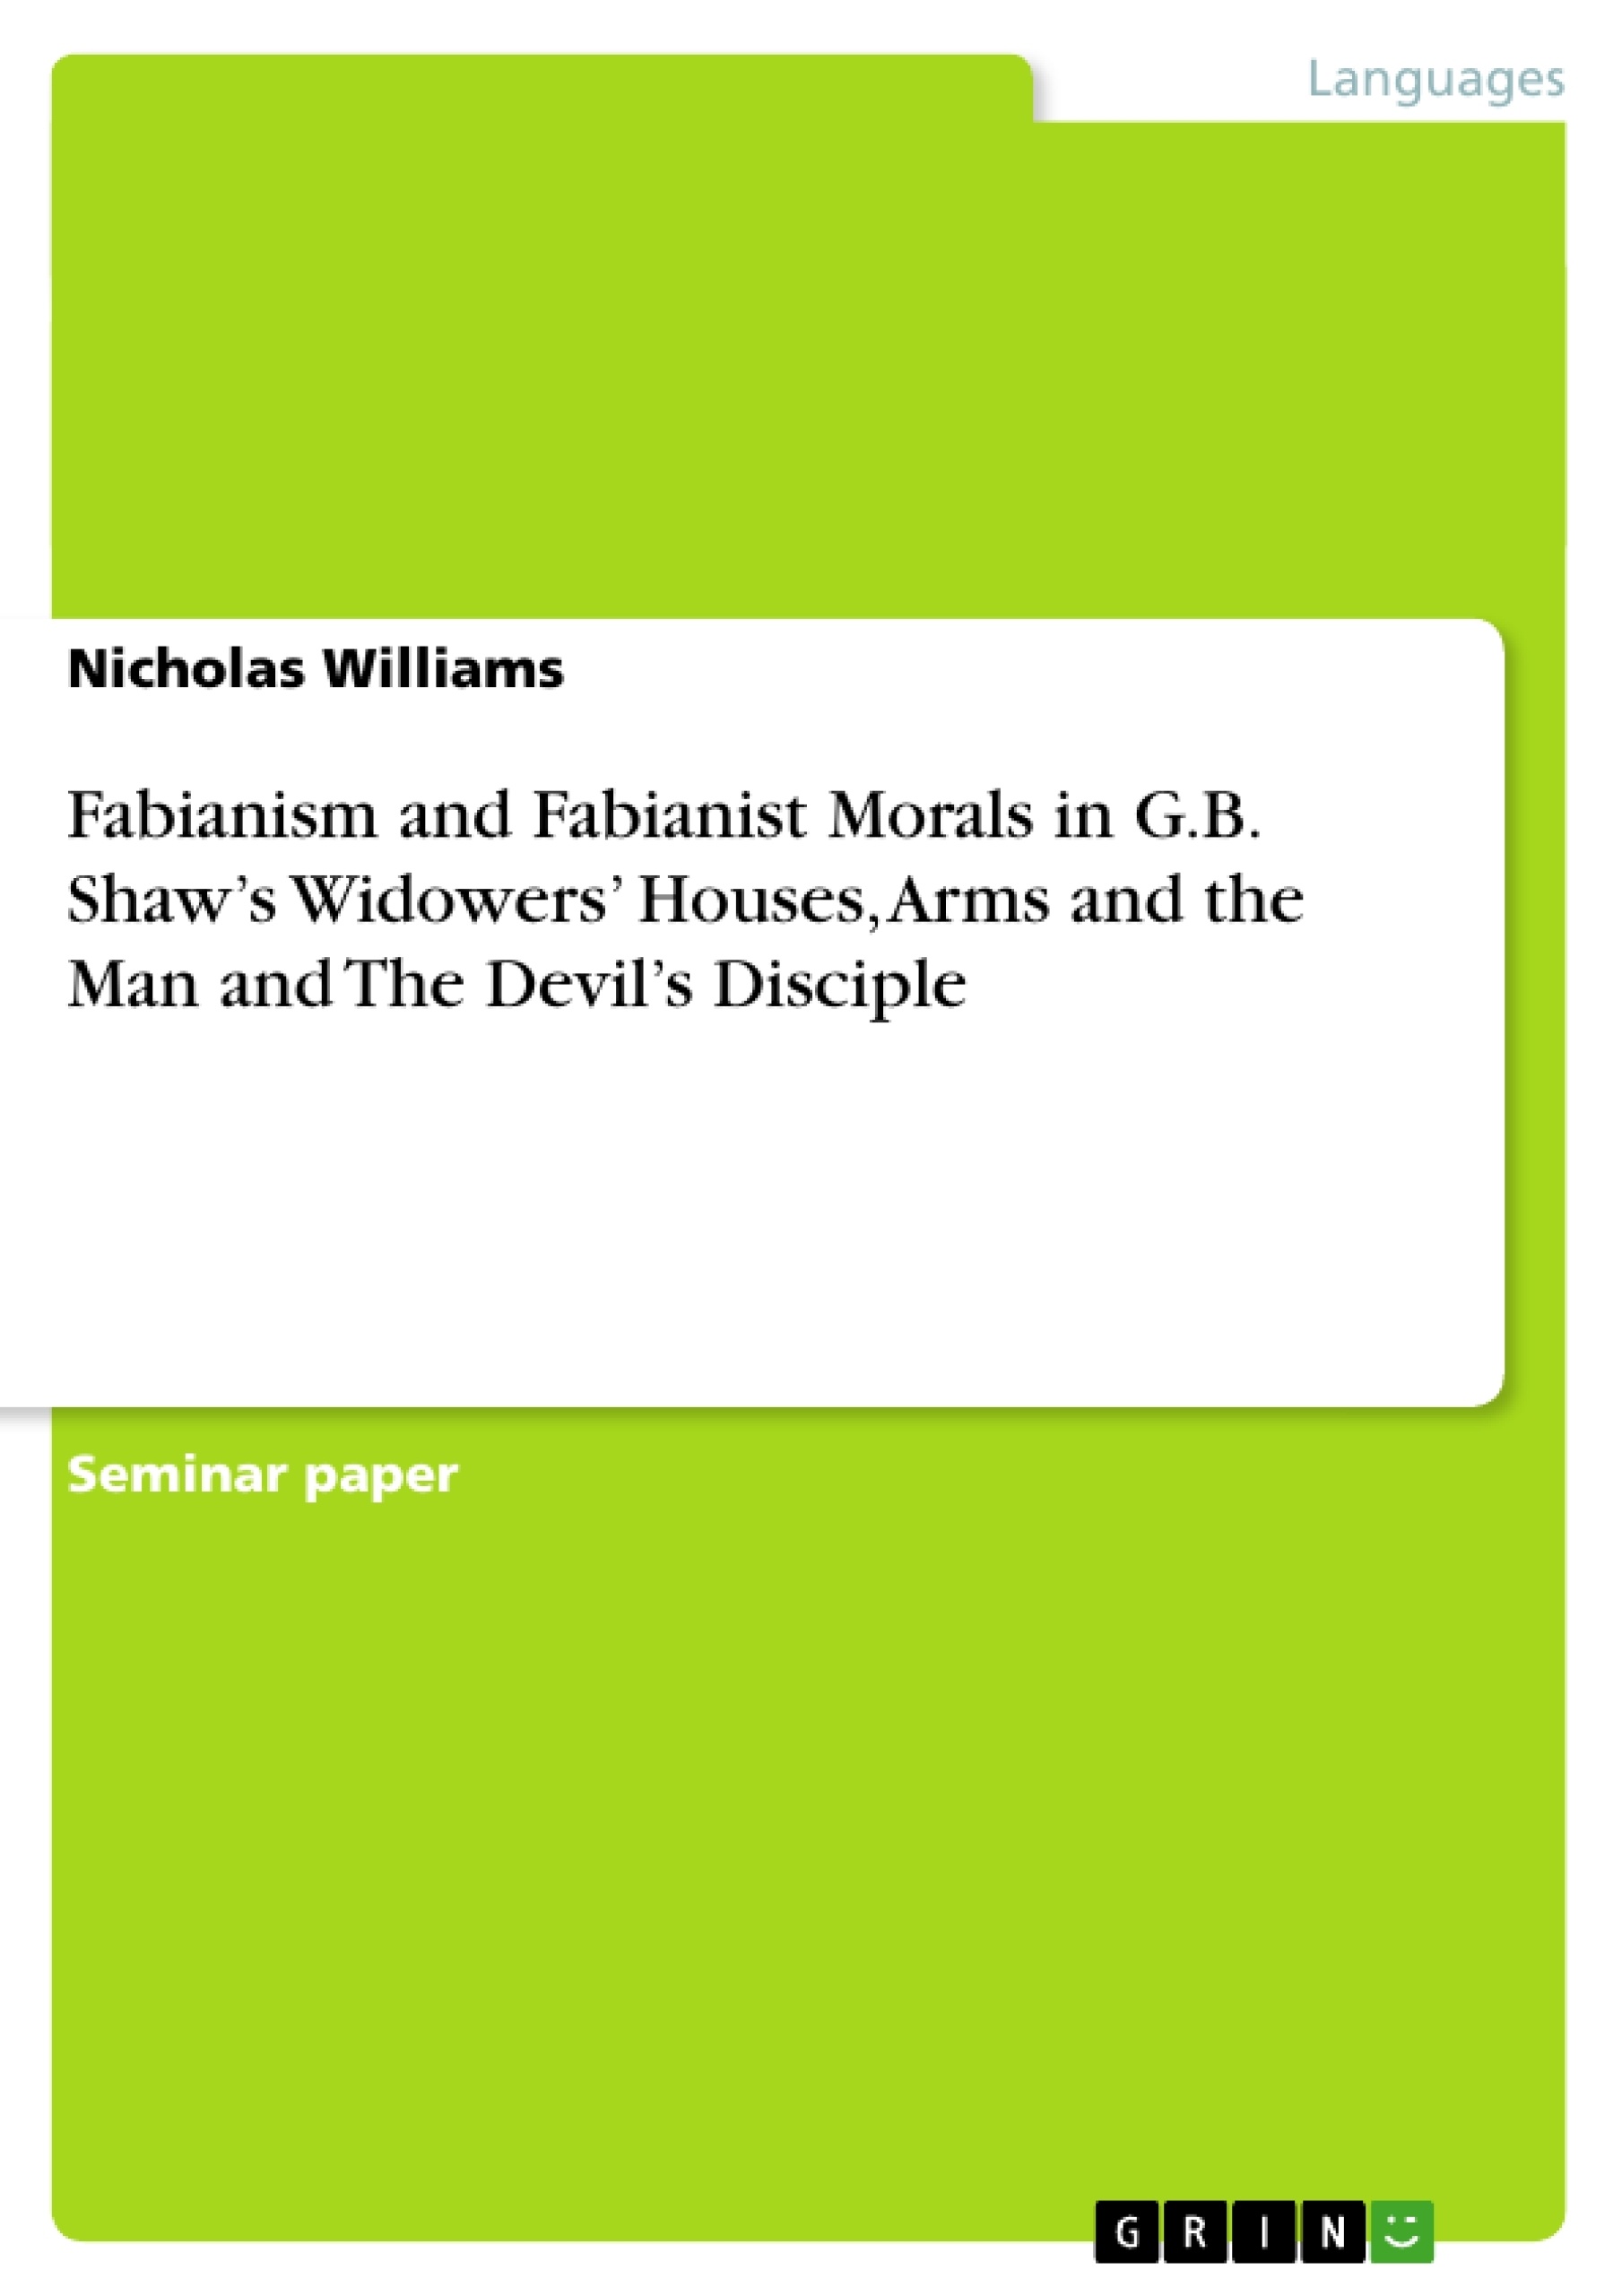 Título: Fabianism and Fabianist Morals in G.B. Shaw’s Widowers’ Houses, Arms and the Man and The Devil’s Disciple